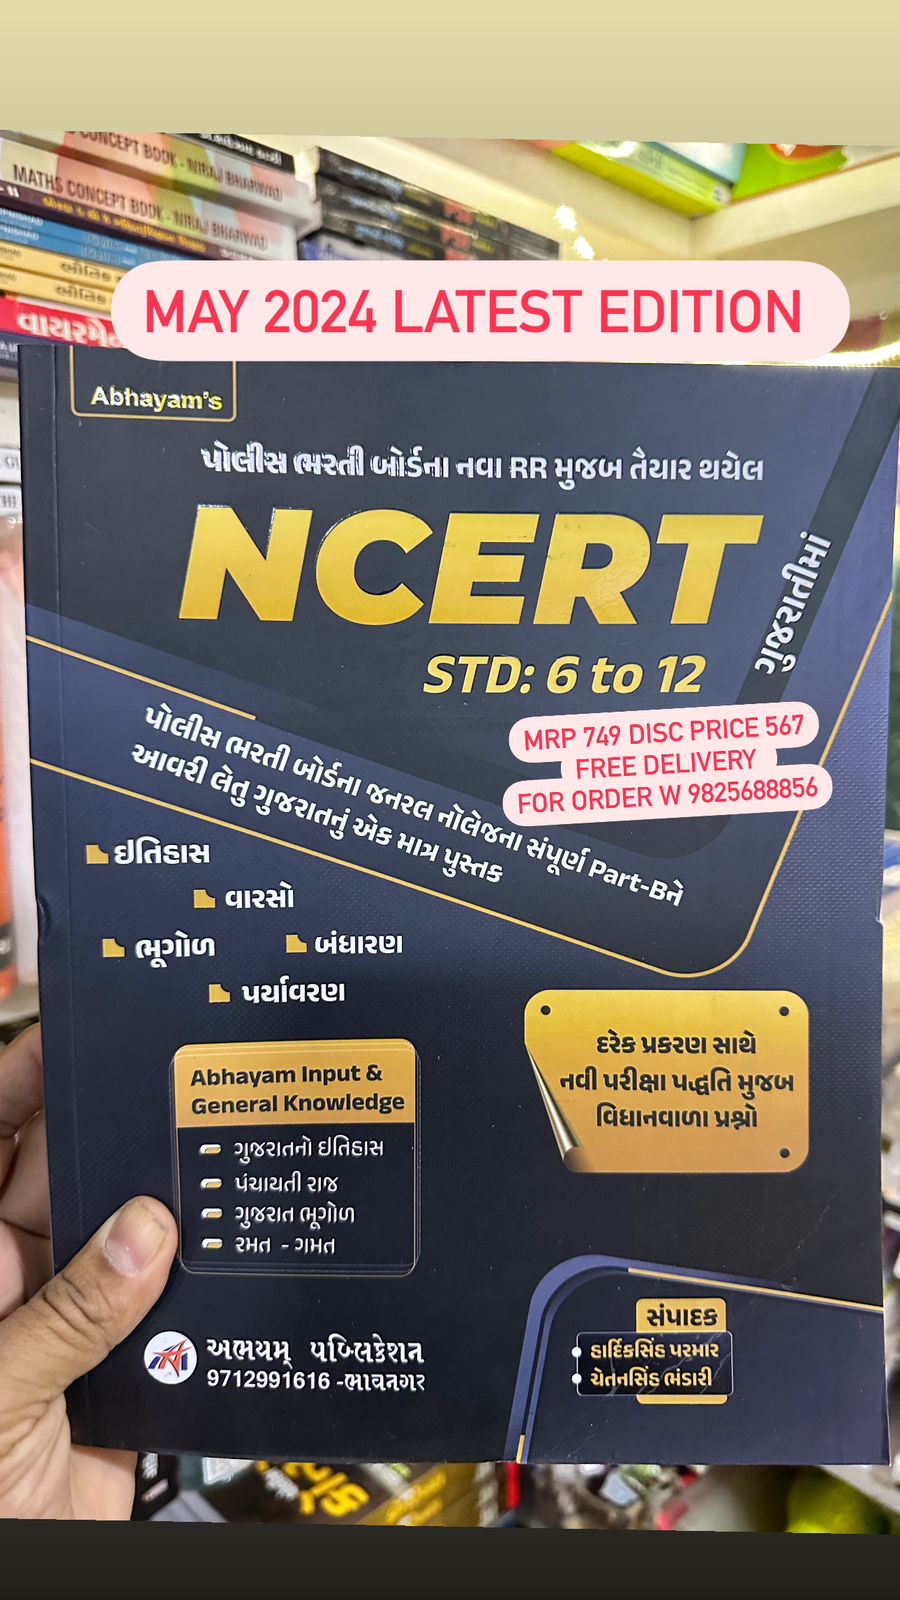 Abhayam's NCERT Dhoran 6 to 12 - New RR - Latest May 2024 Edition